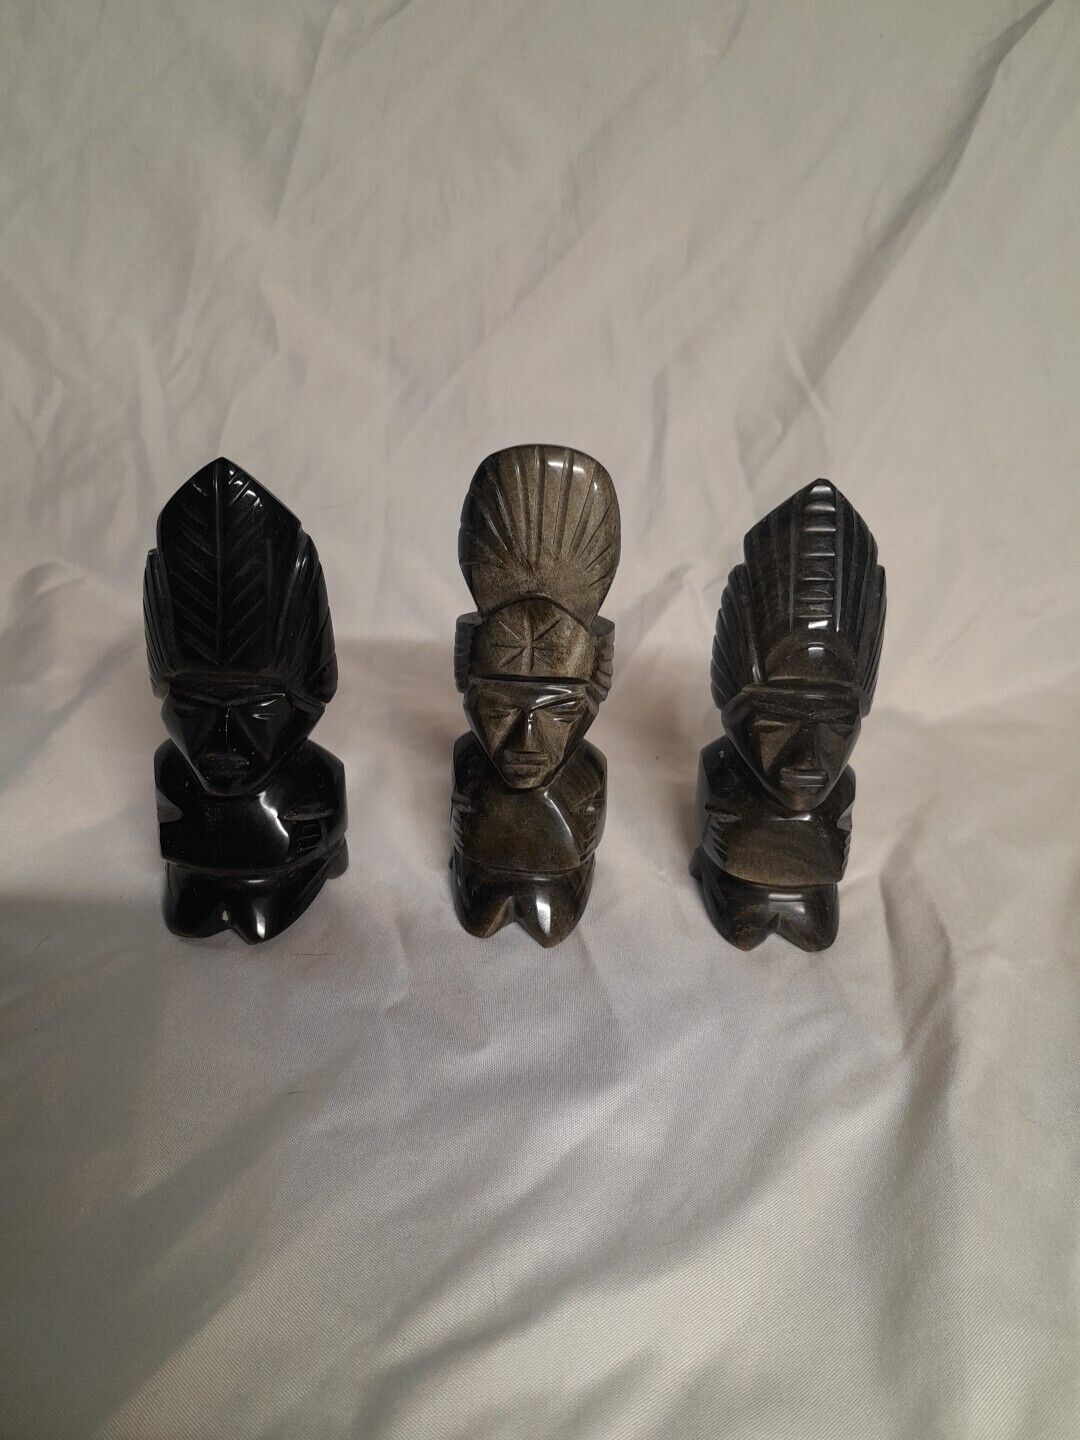 Gold Sheen Black Obsidian Stone Hand Carved Mayan Aztec Incan Figures Lot Of 3